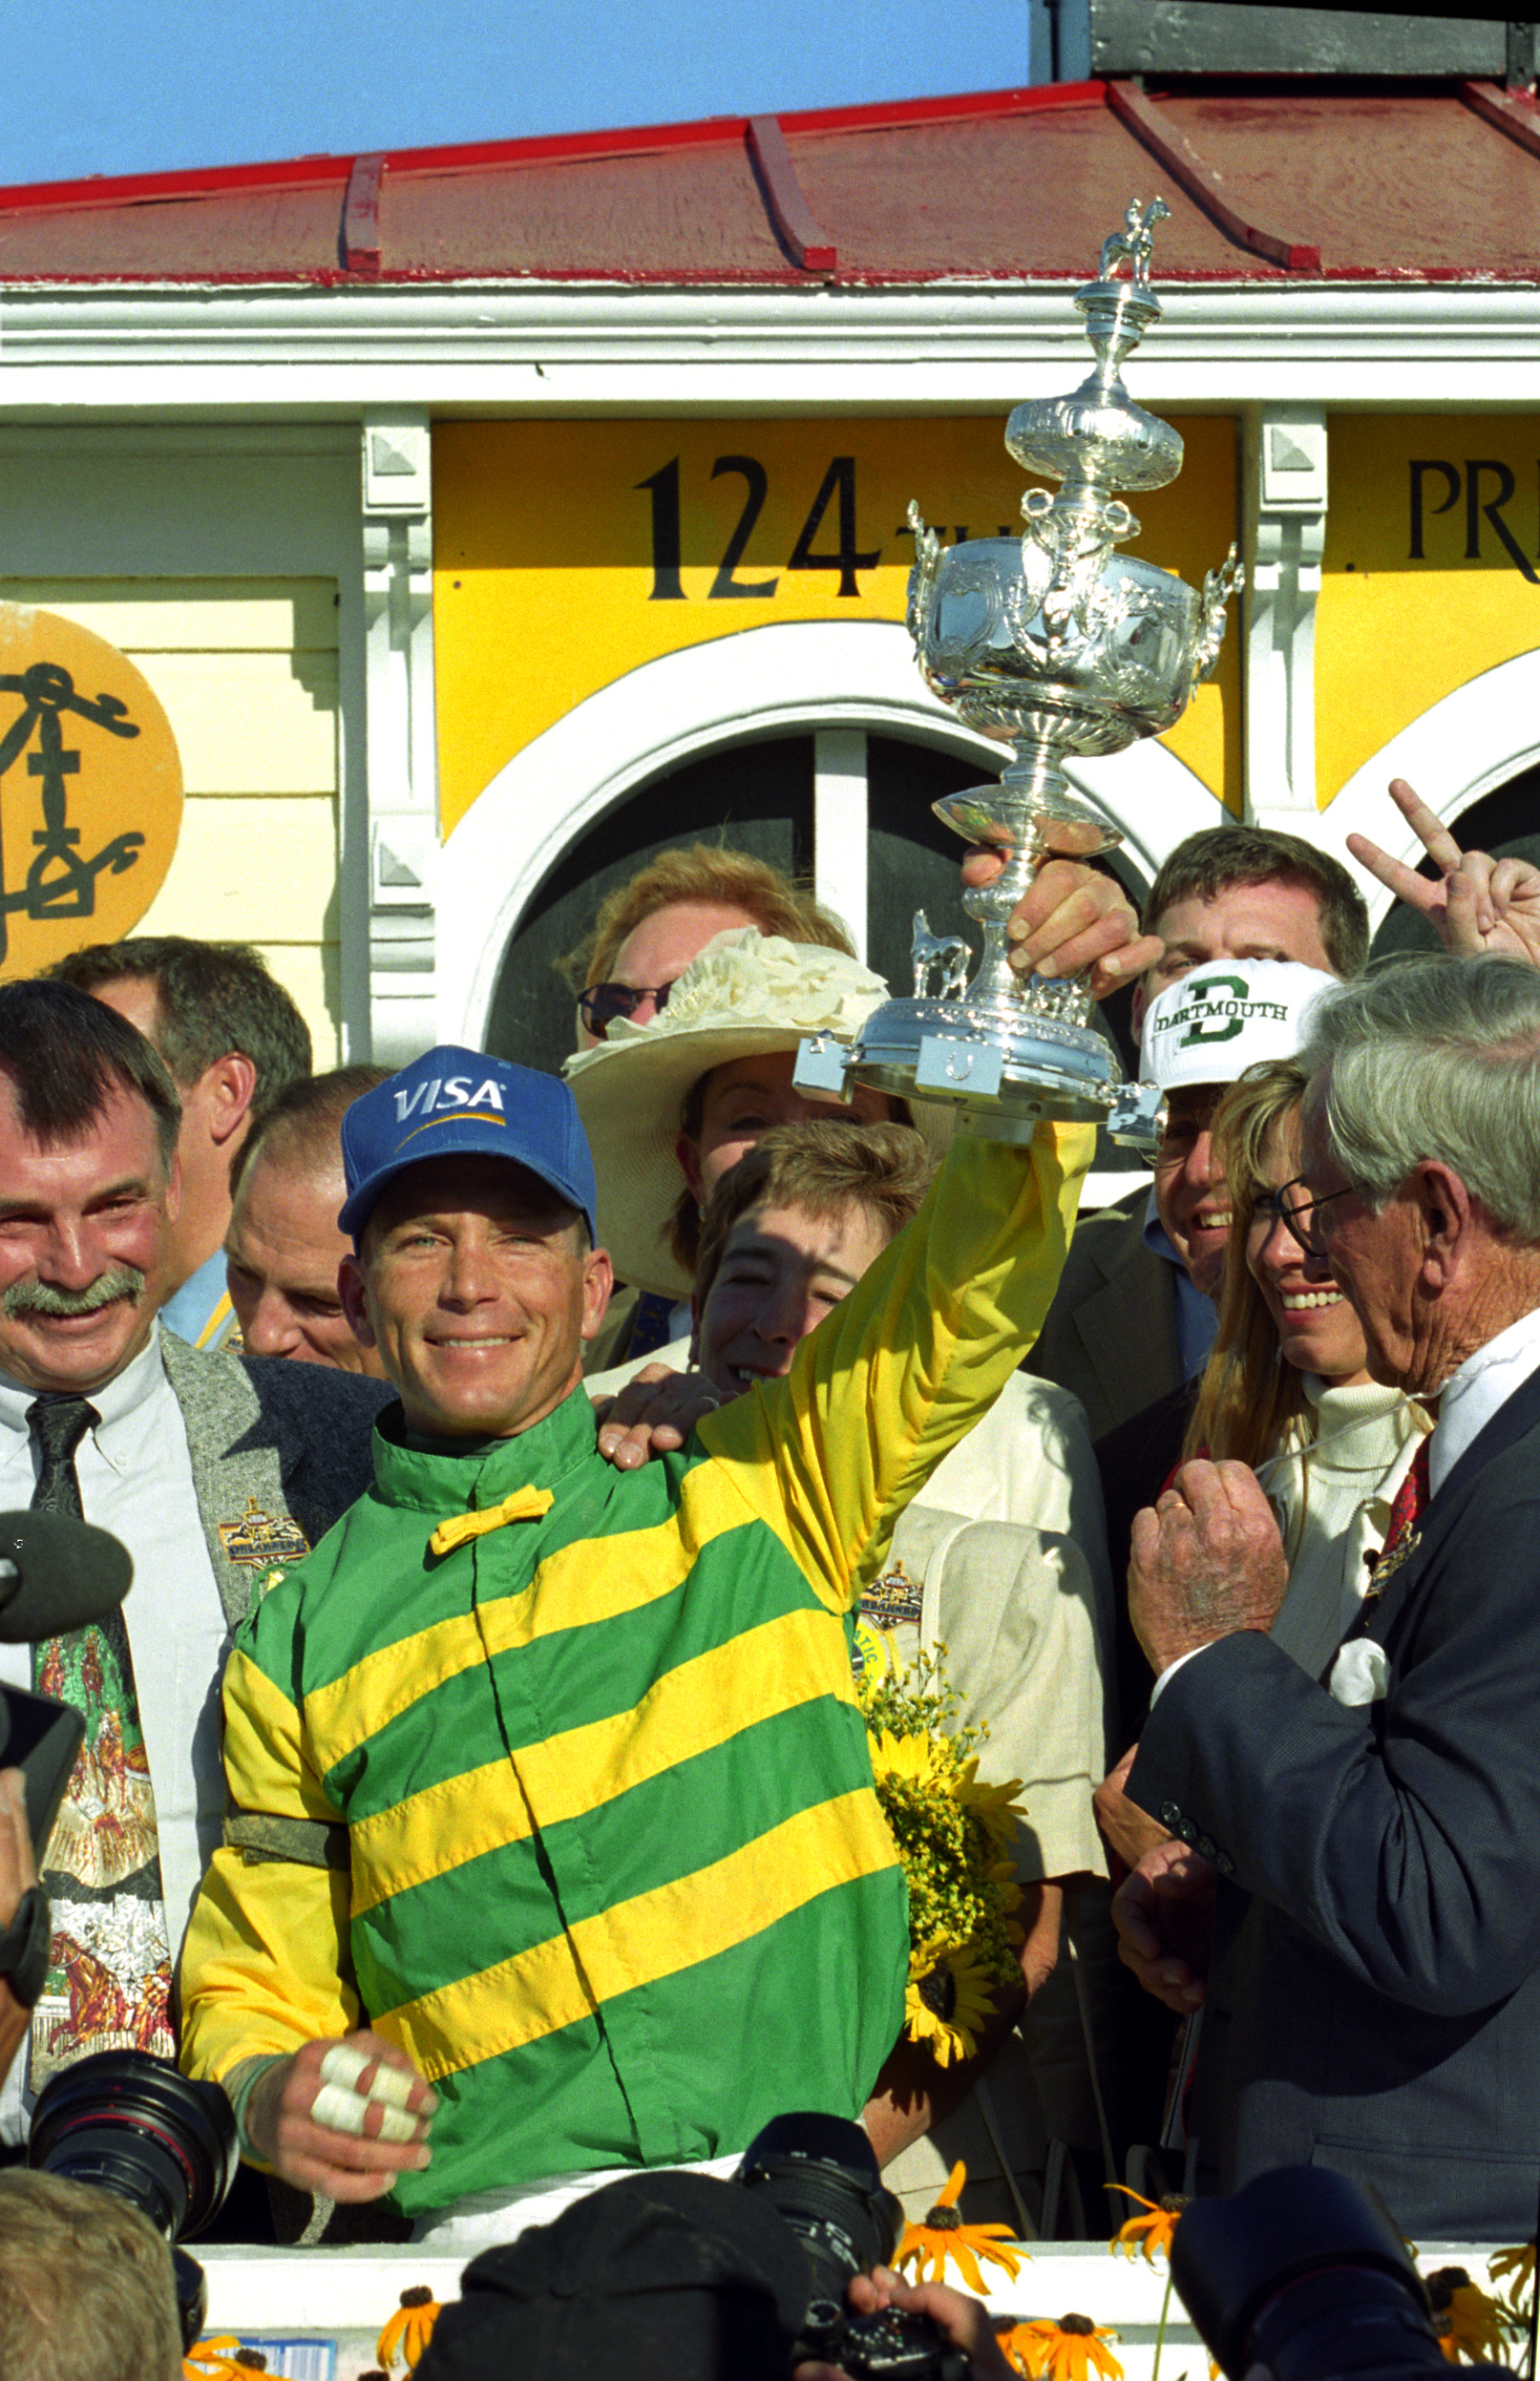 Chris Antley celebrates winning the 1999 Preakness Stakes with Charismatic (Barbara D. Livingston)